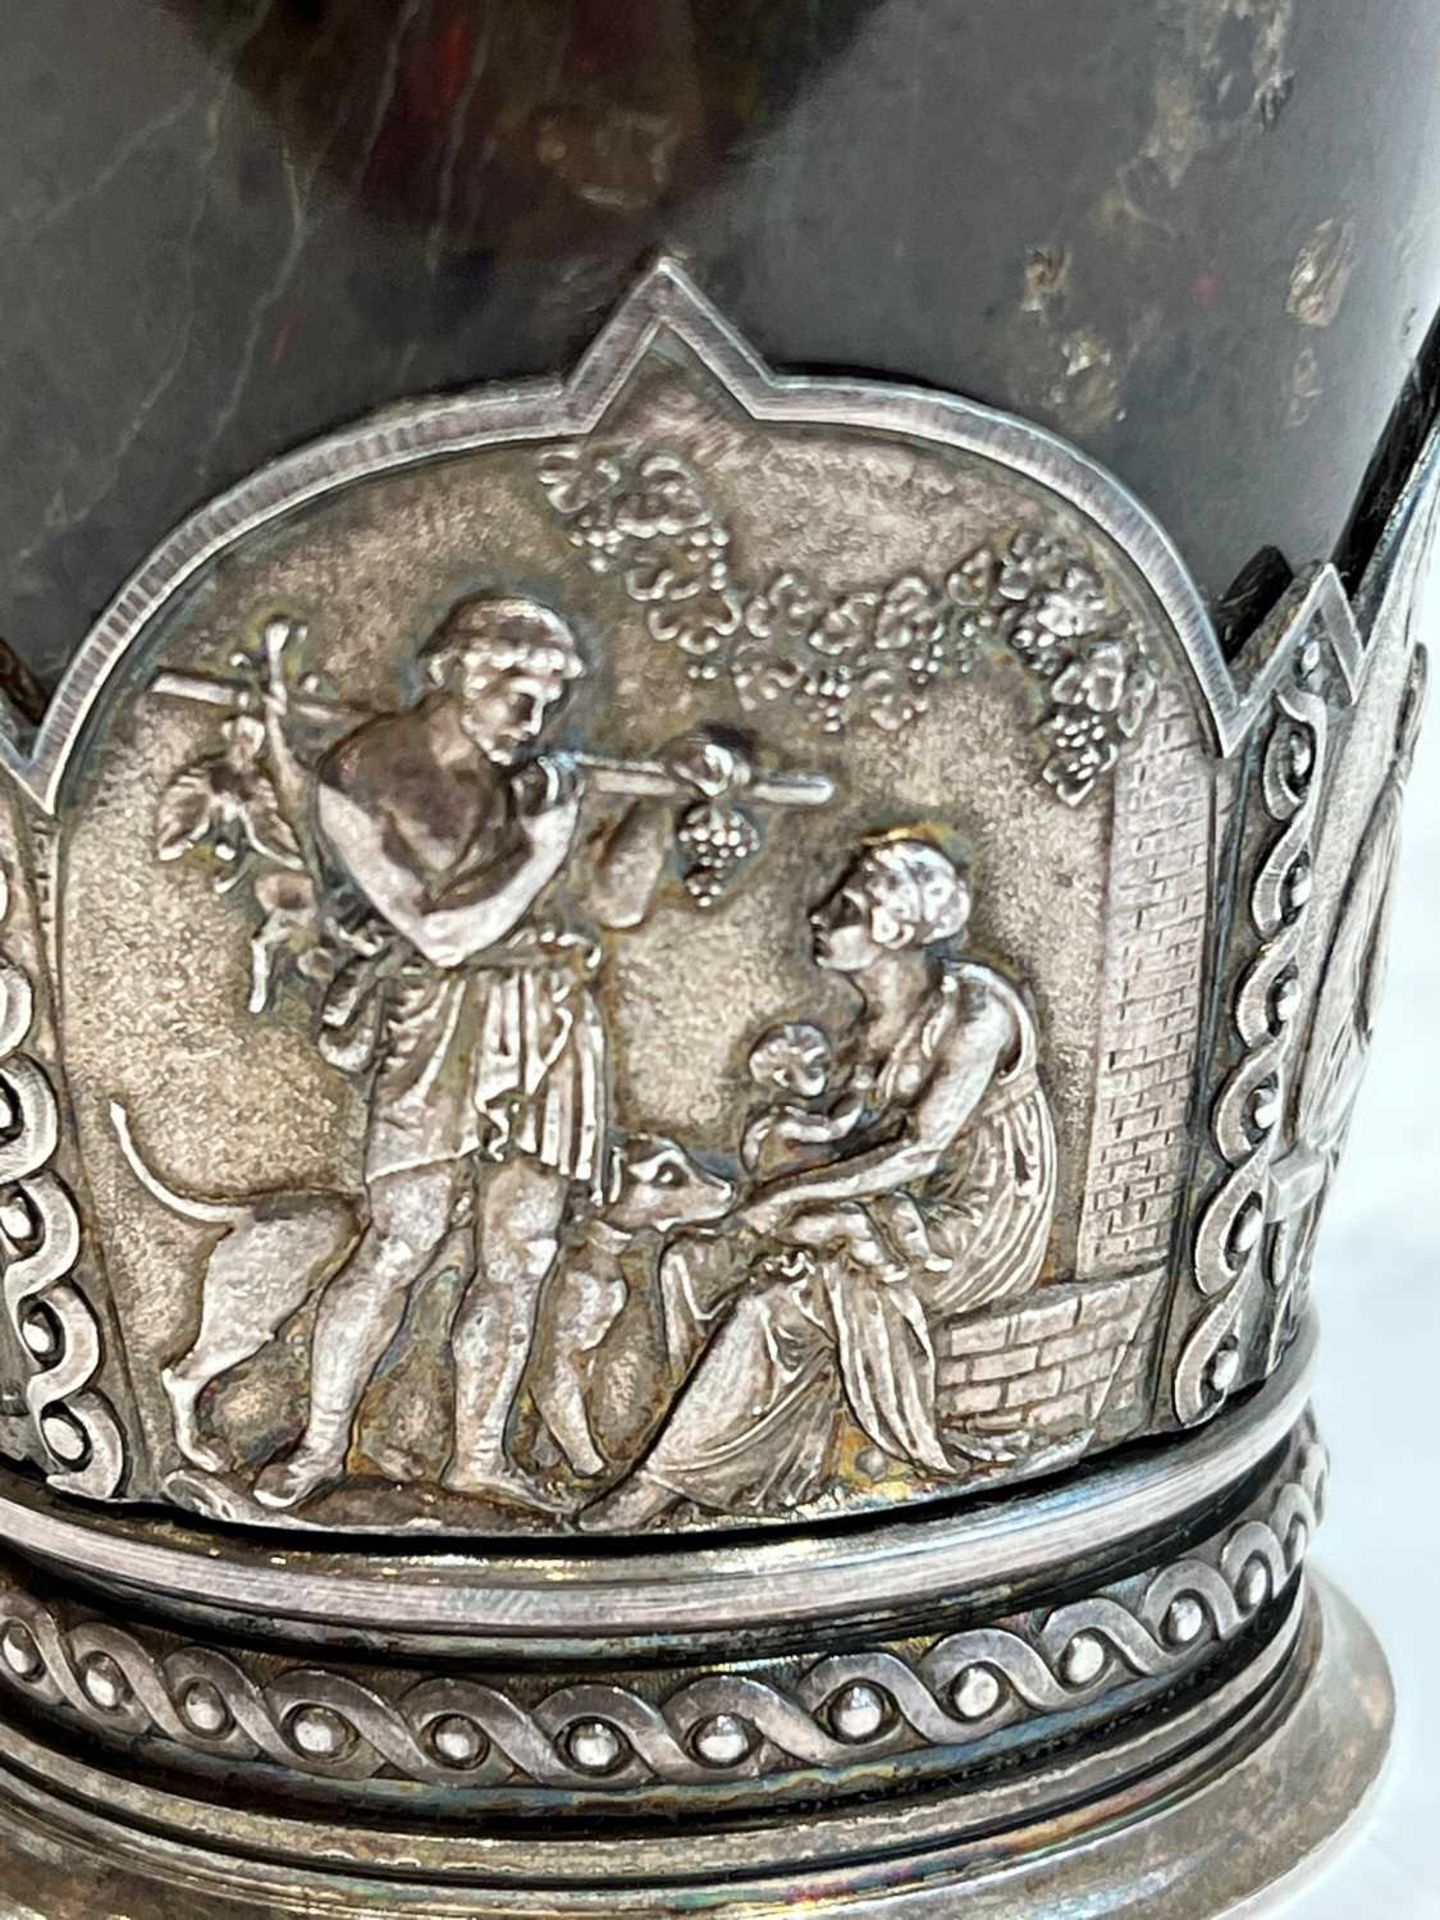 THE FOUR SEASONS CUP: A FINE 19TH CENTURY SILVER MOUNTED CUP WITH RELIEFS AFTER THORVALDSEN - Image 6 of 6